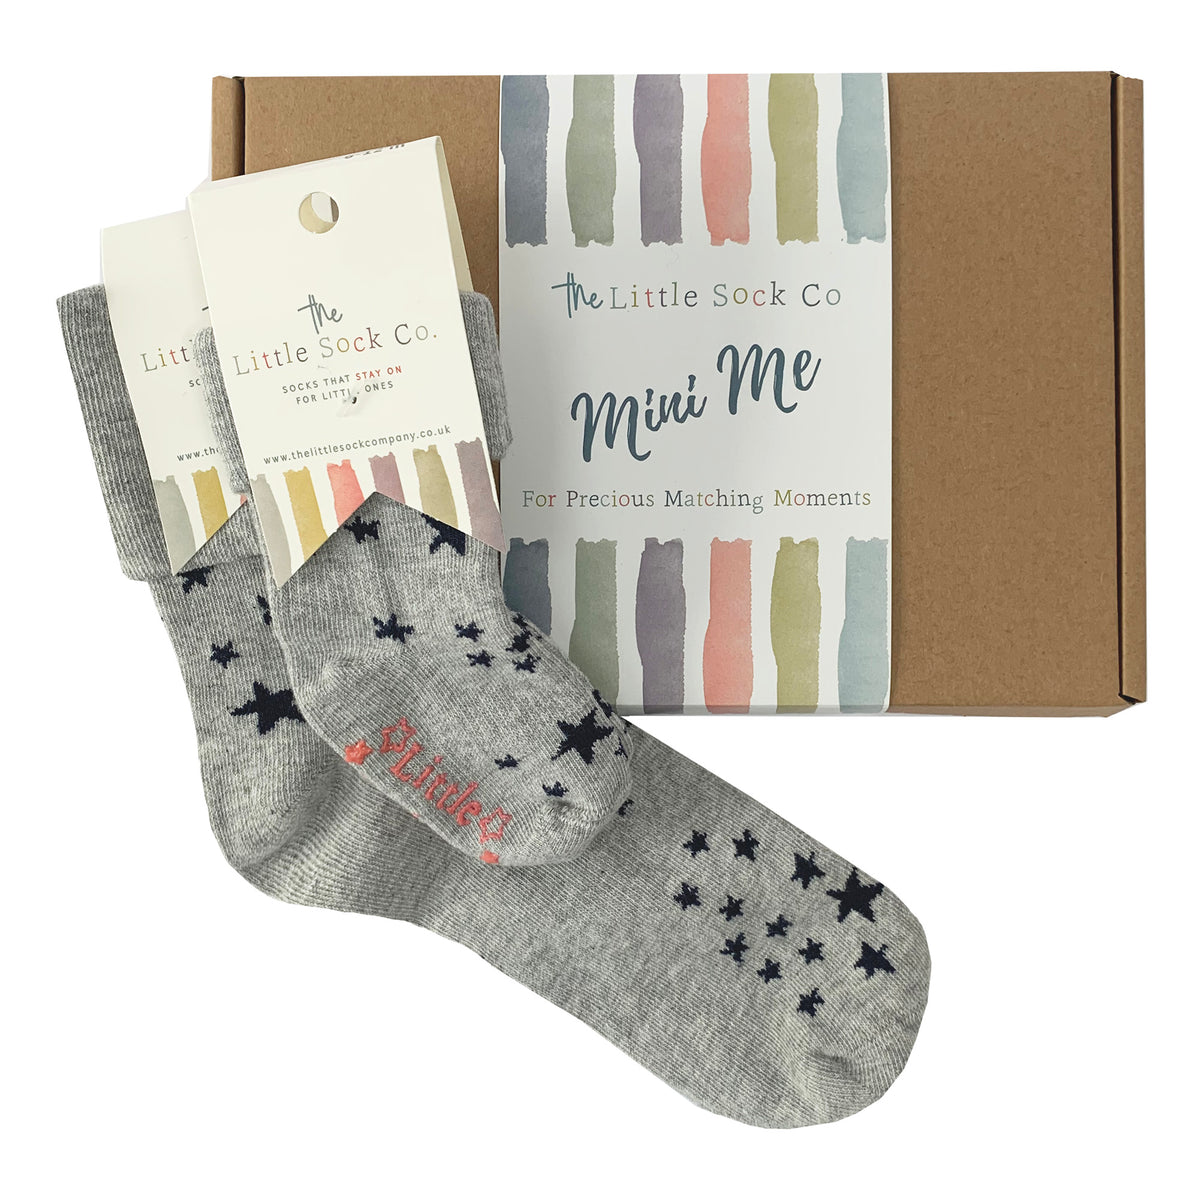 Mini Me Matching Adult and Child Family Socks Gift Set in Stars ⭐️ - The Perfect Gift for Birthdays or Father Day